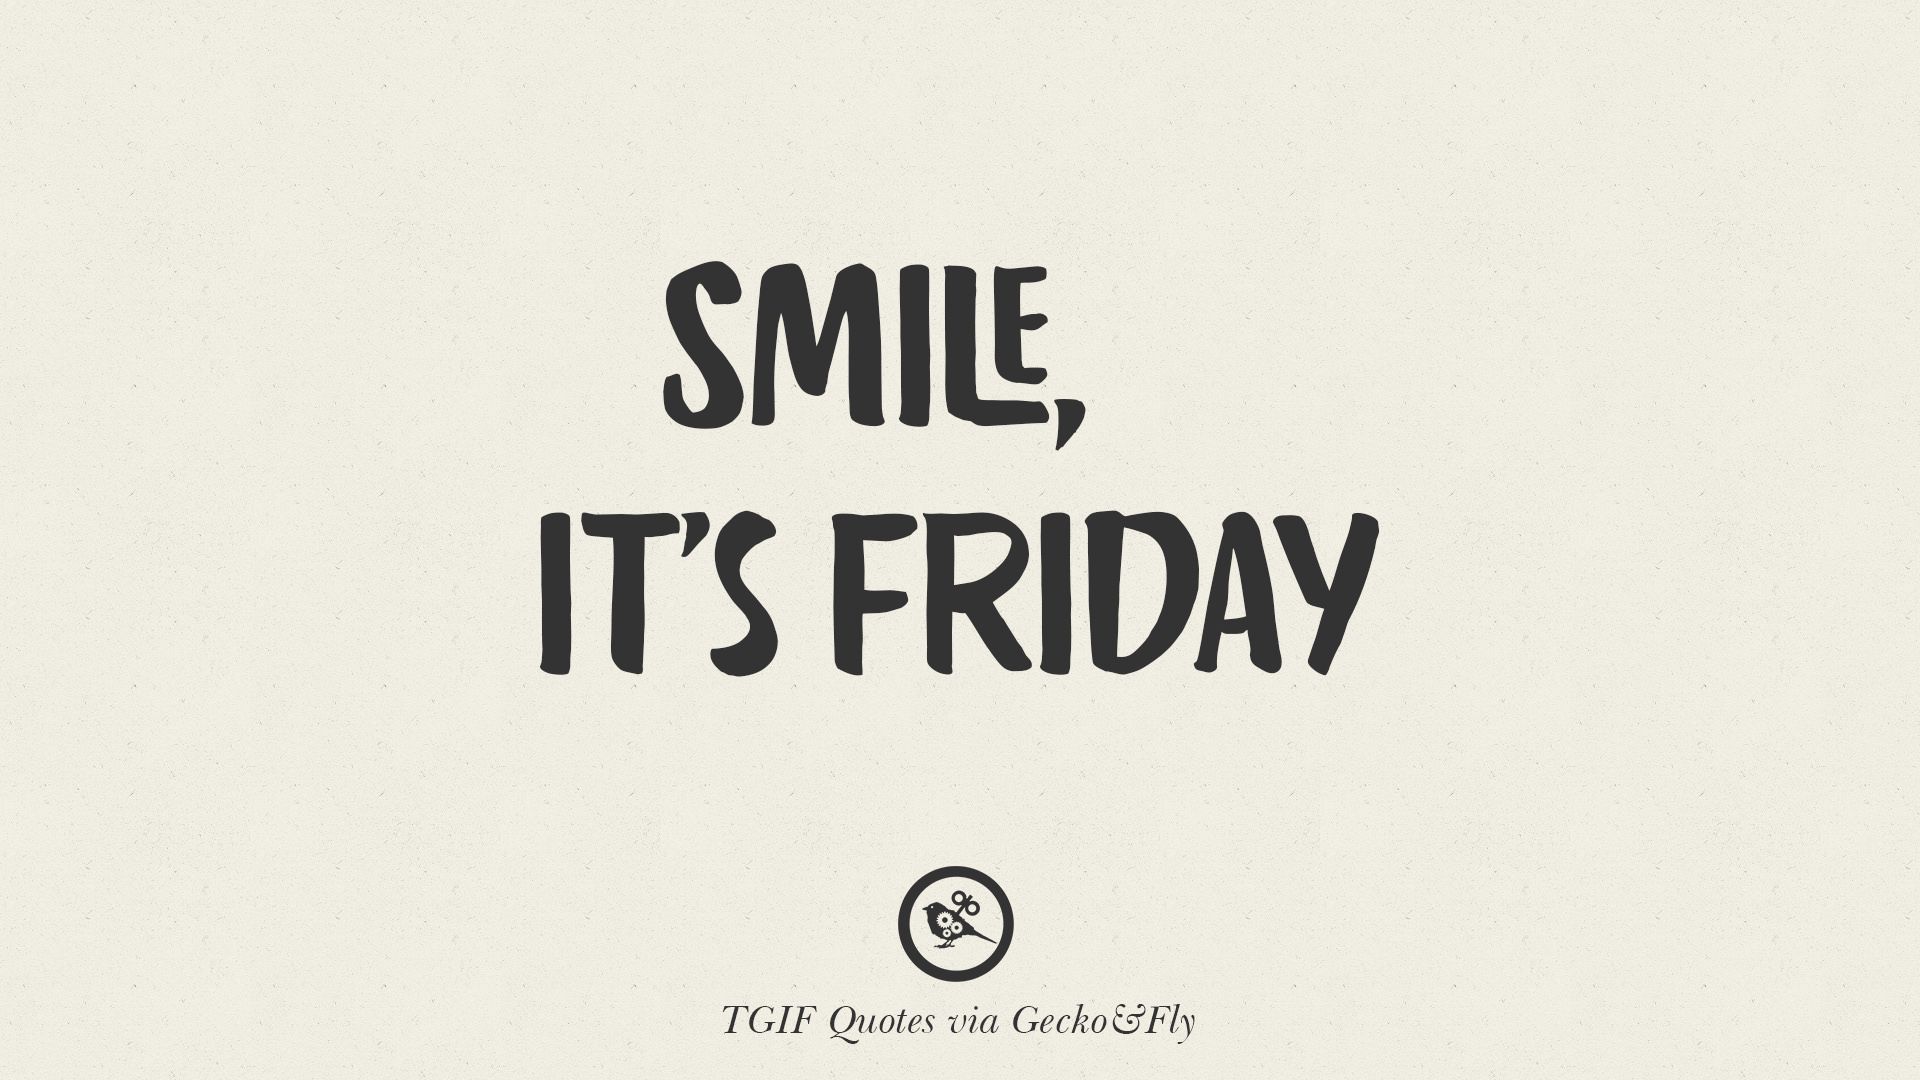 TGIF [ Thank God It's Friday ] Meme Quotes & Messages